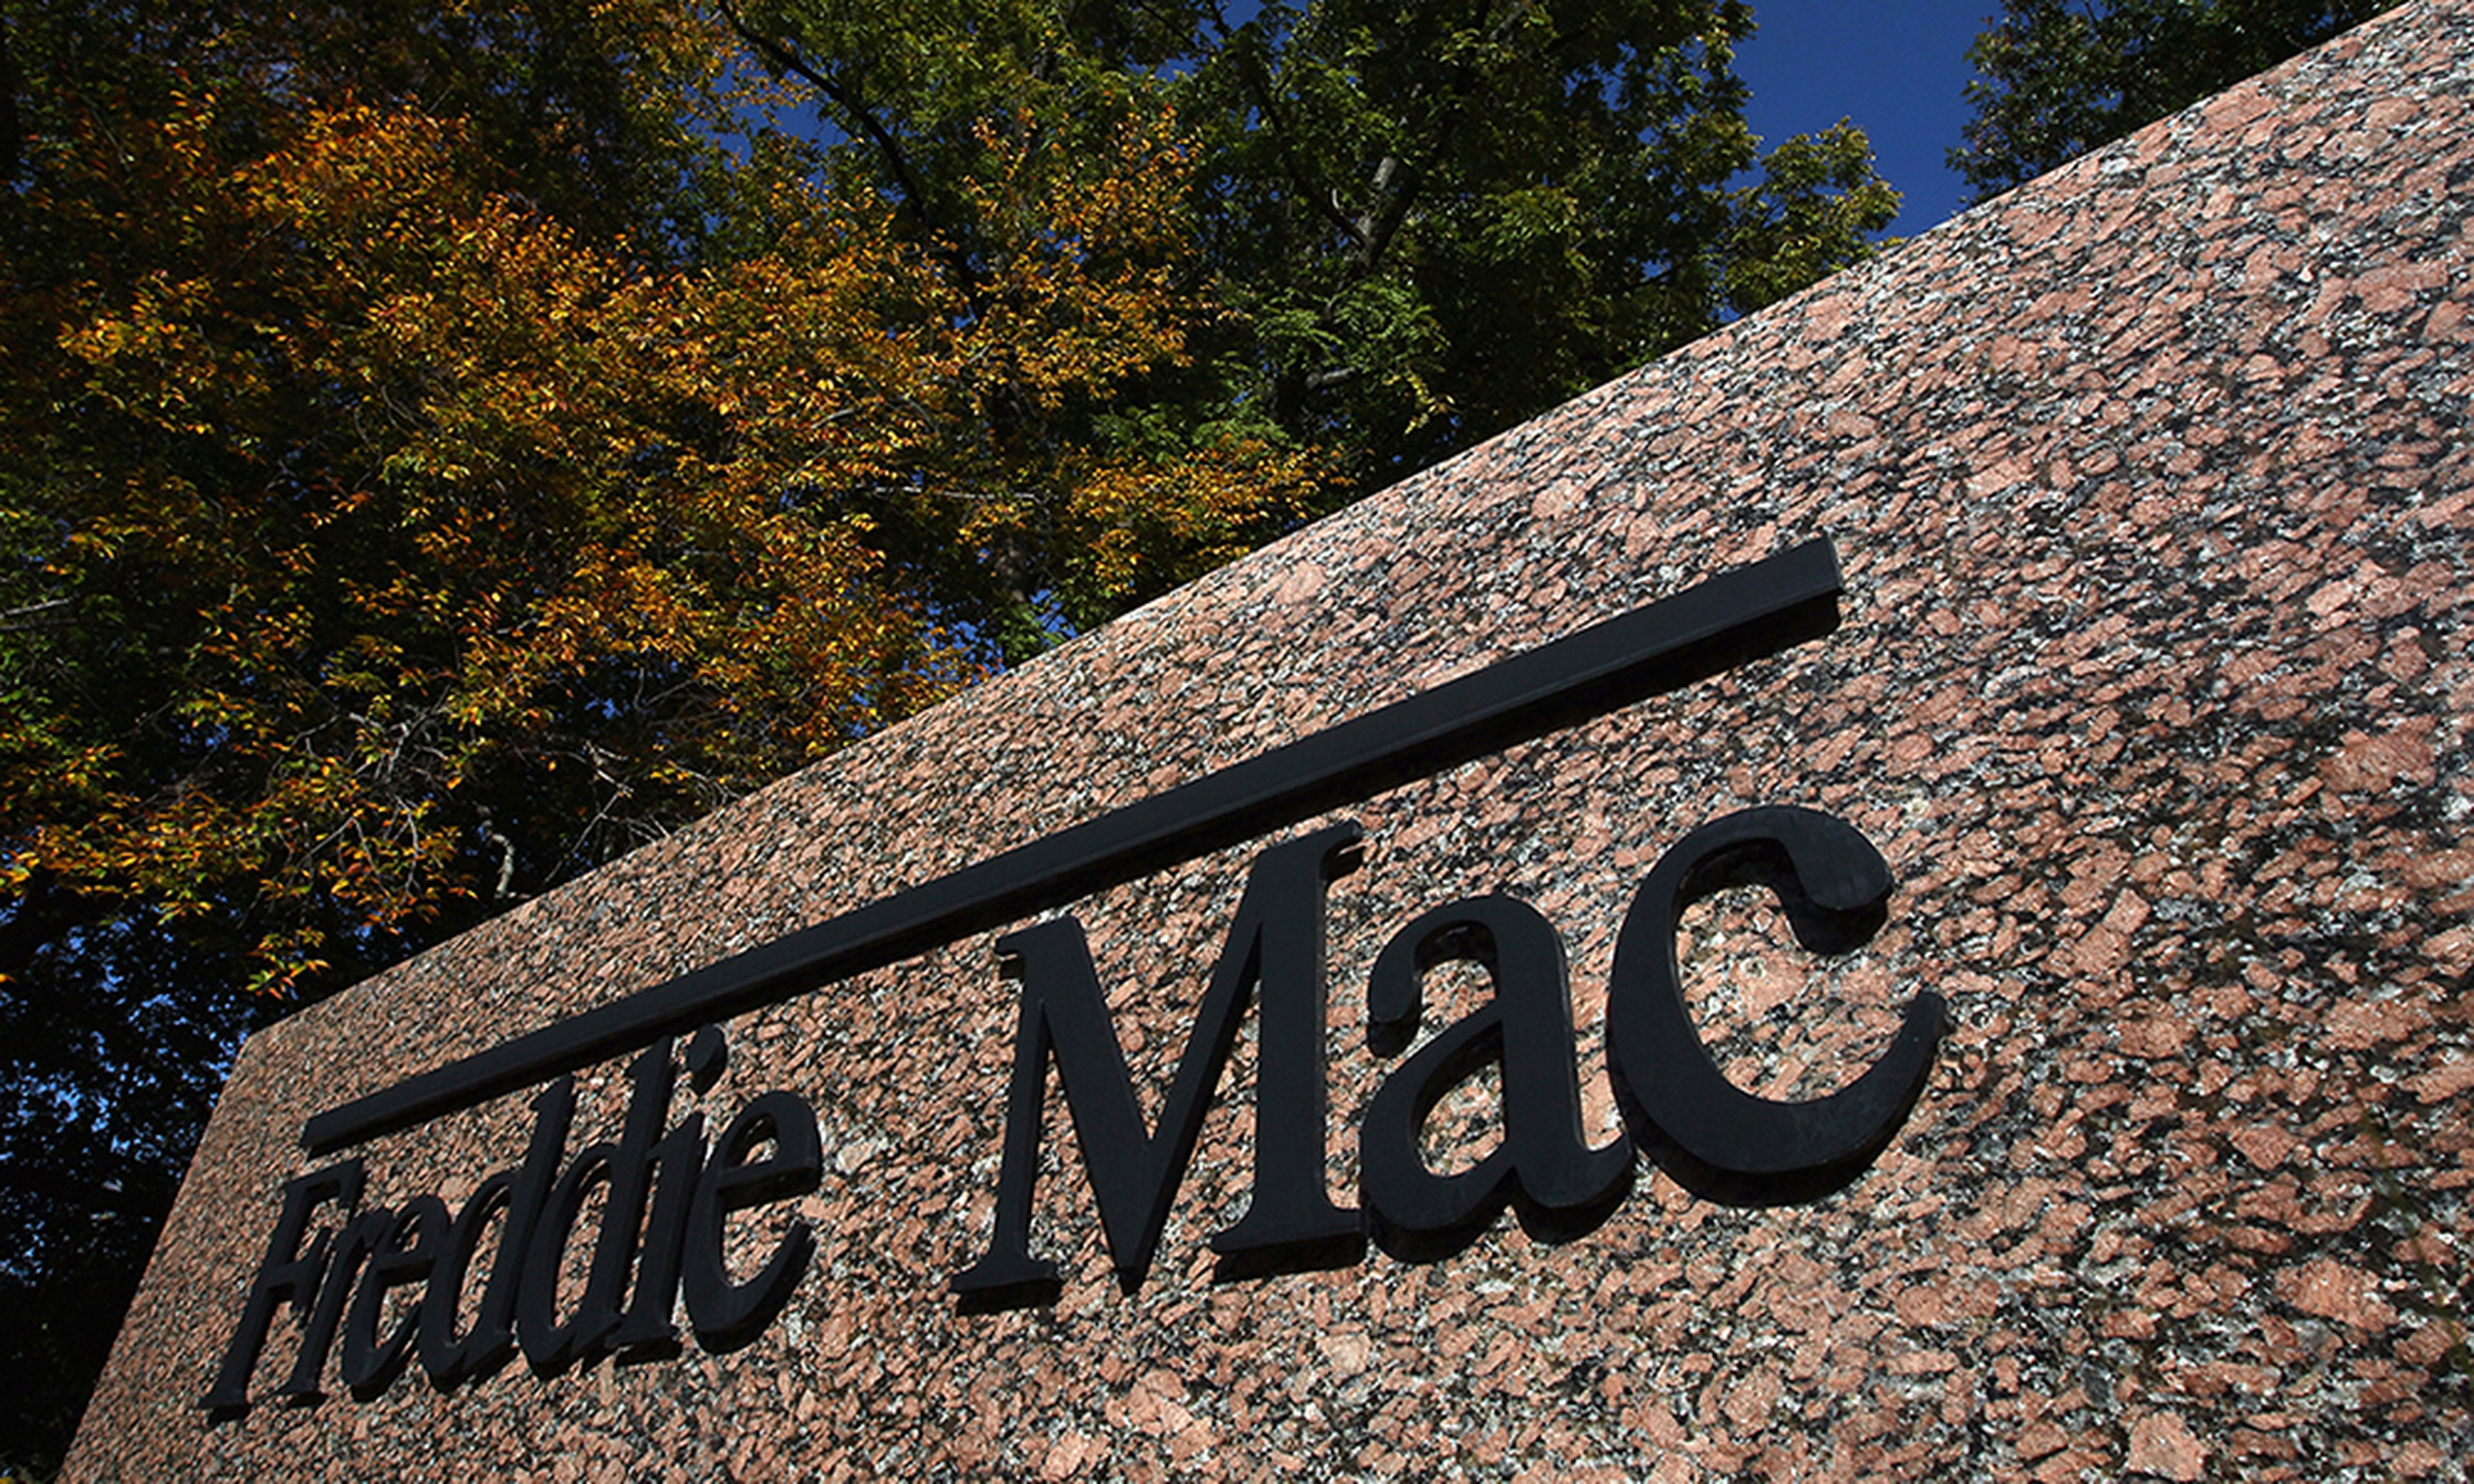 The headquarters of Freddie Mac are seen Oct. 21, 2010, in McLean, Va. (Photo by Win McNamee/Getty Images)